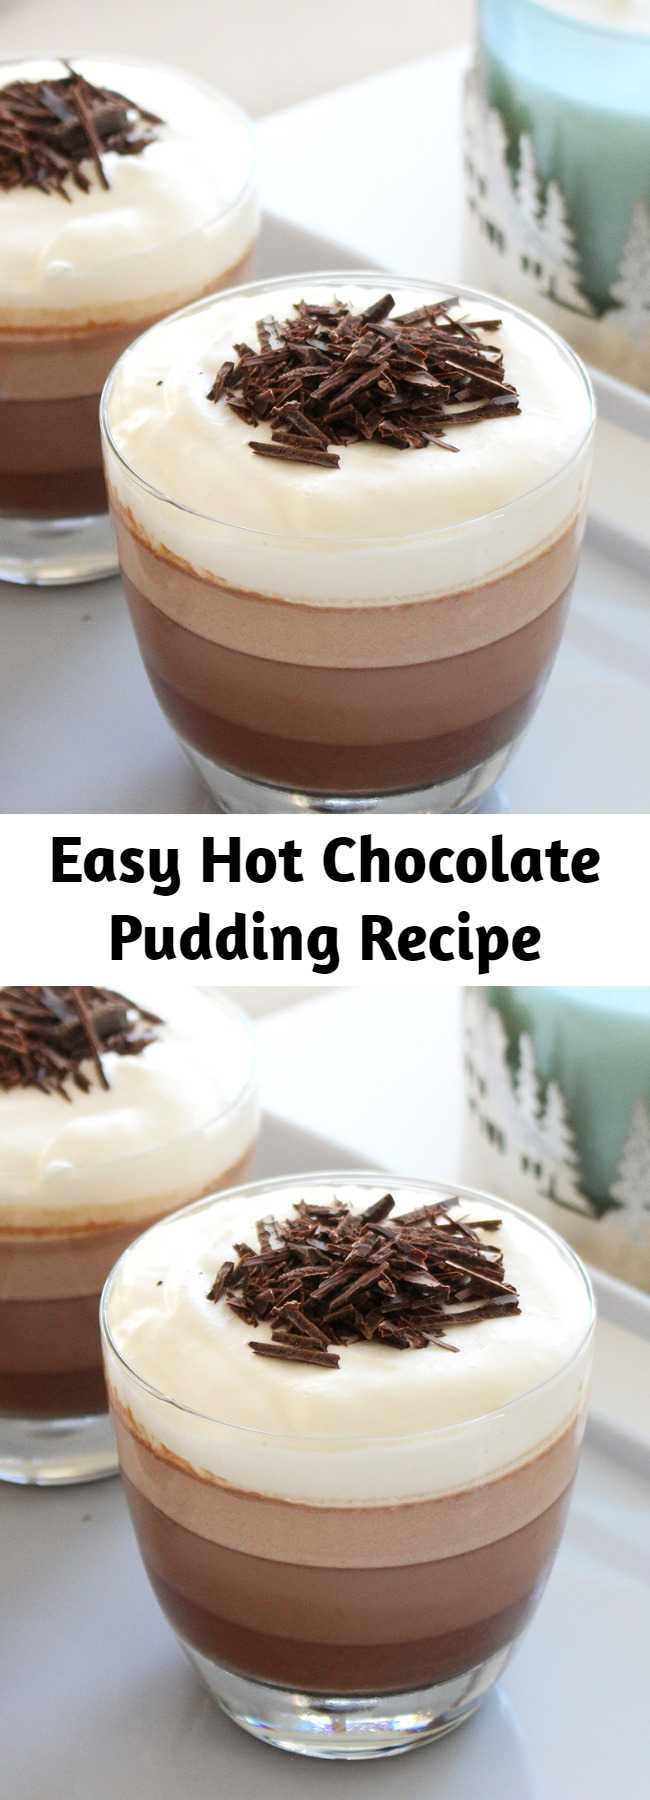 Easy Hot Chocolate Pudding Recipe - This pudding tastes like smooth and creamy hot chocolate and creates beautiful, fuss-free ombre effect when served in glass bowls!